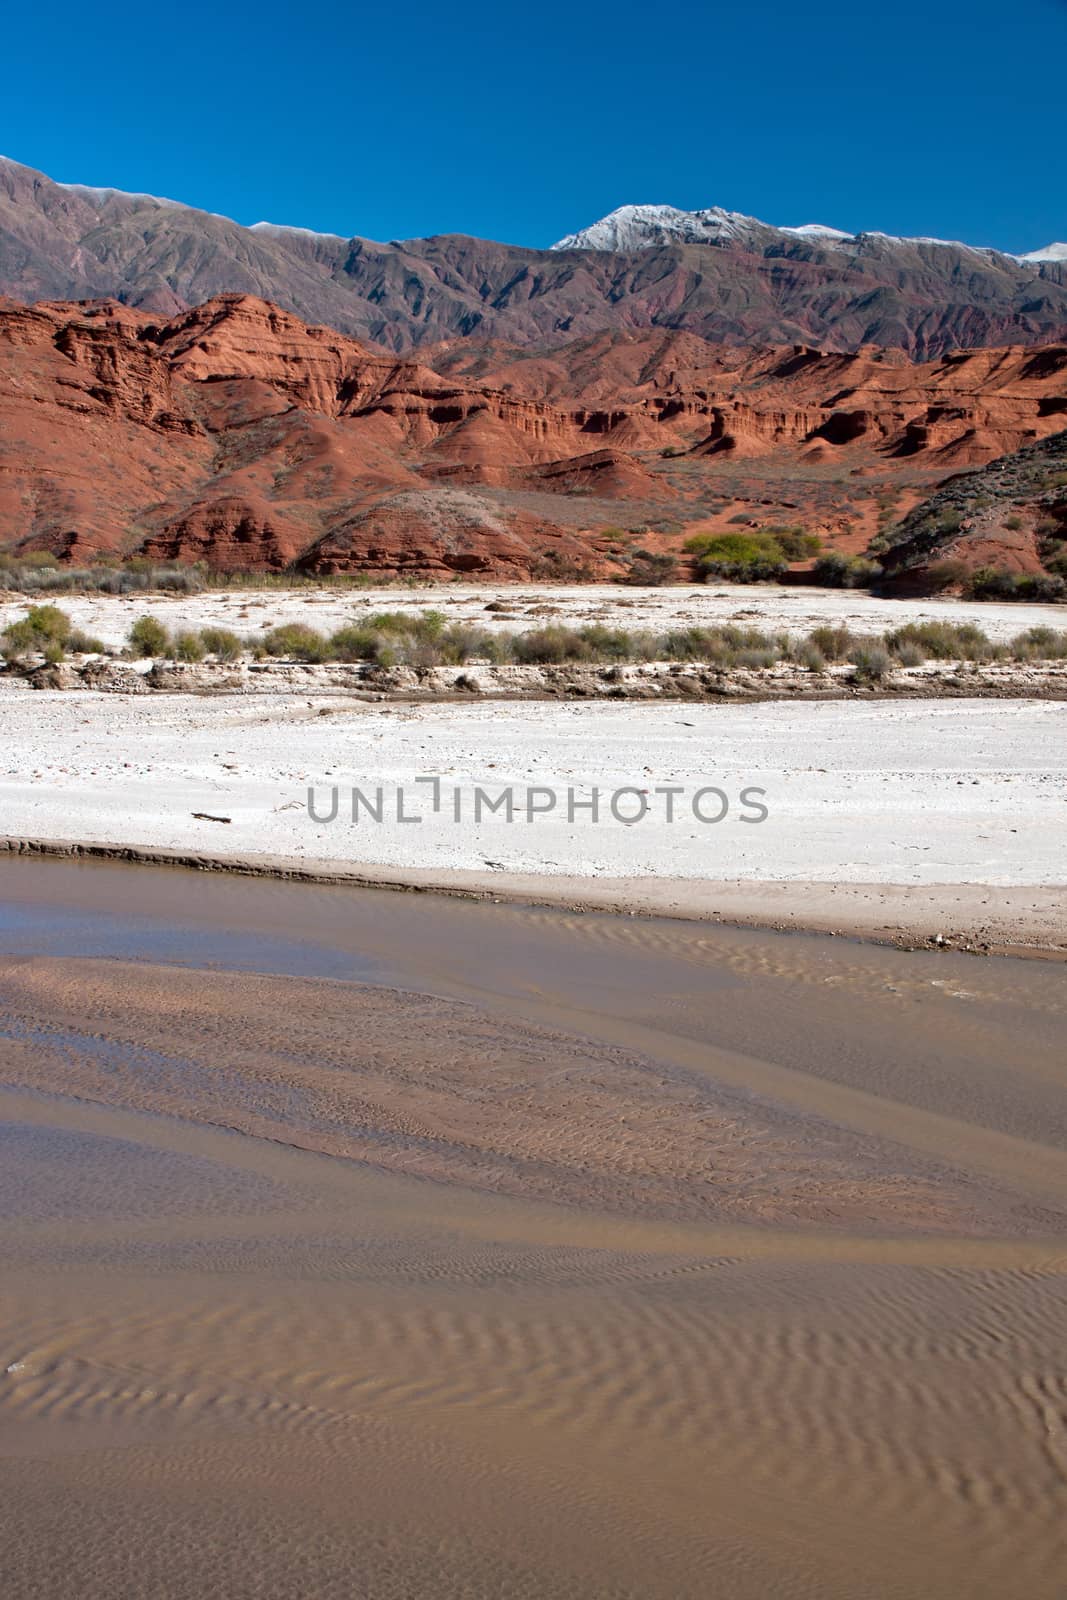 Landscape in the Salta province in northern Argentina